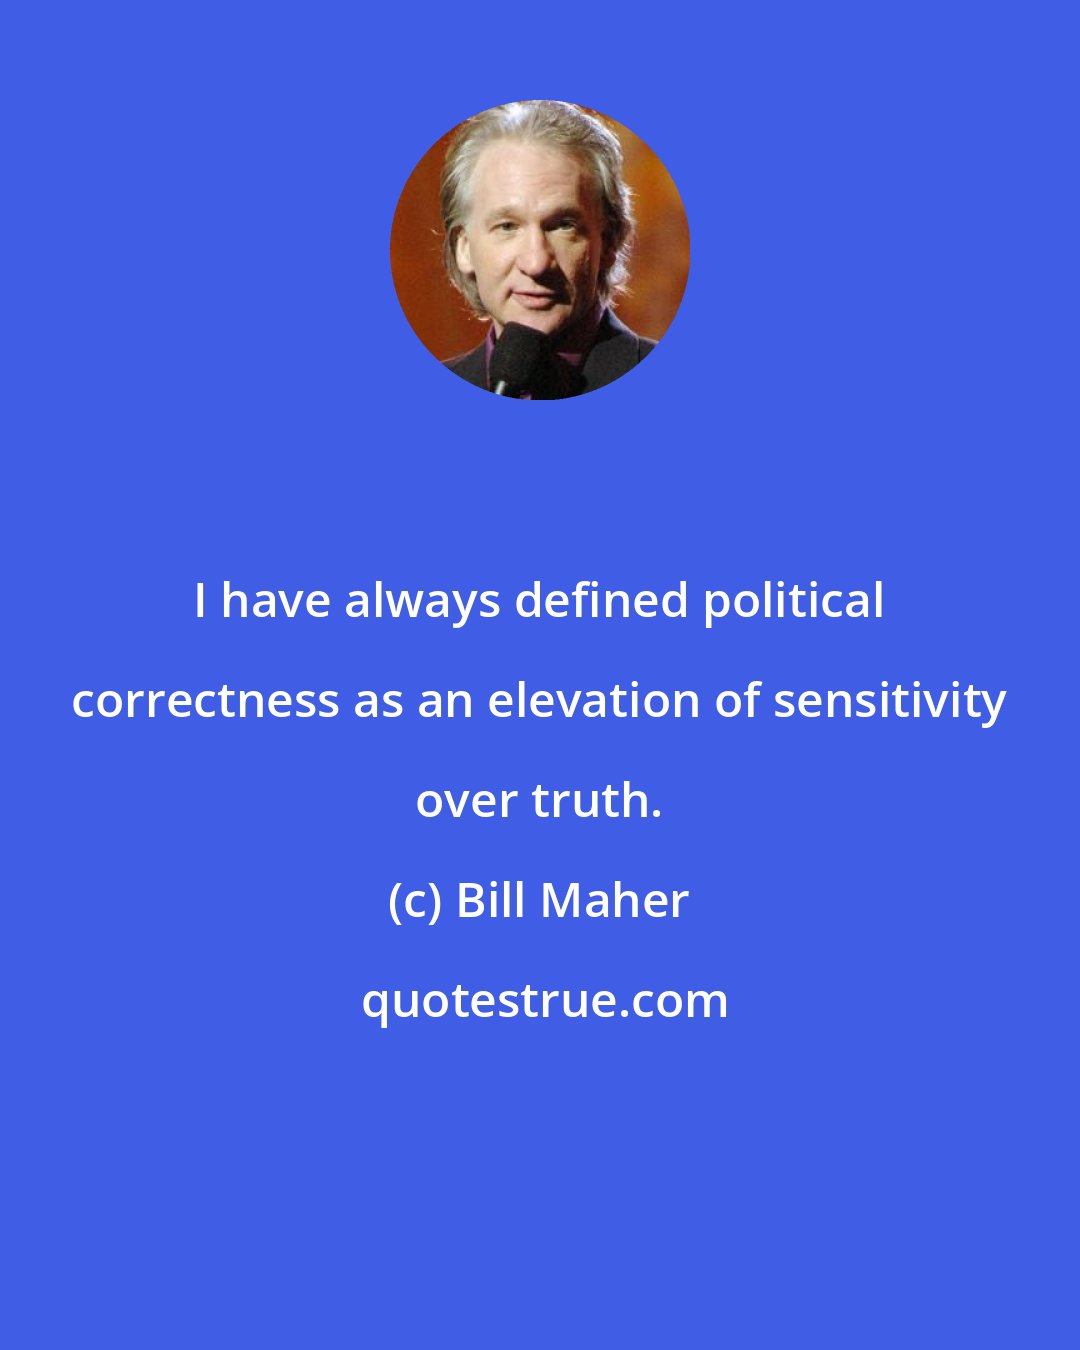 Bill Maher: I have always defined political correctness as an elevation of sensitivity over truth.